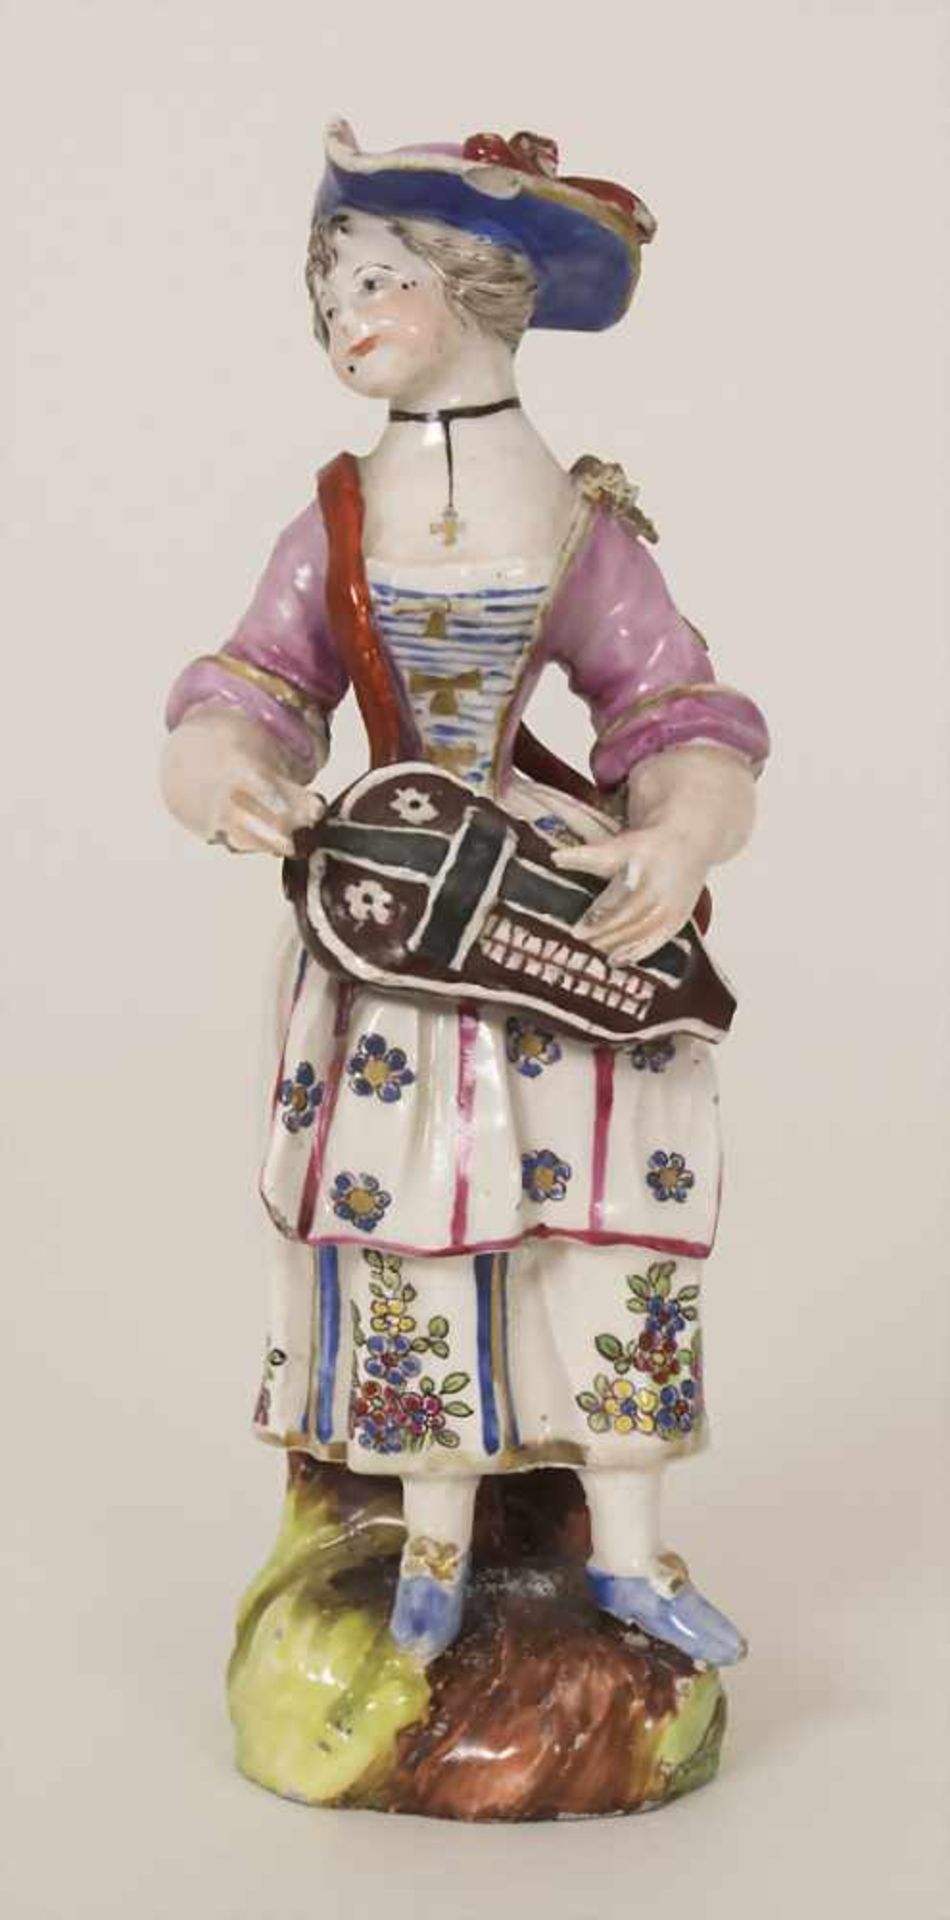 Junge Leierspielerin / A young woman playing a lyre, wohl Niderviller, um 1770Material: Fayence, mit